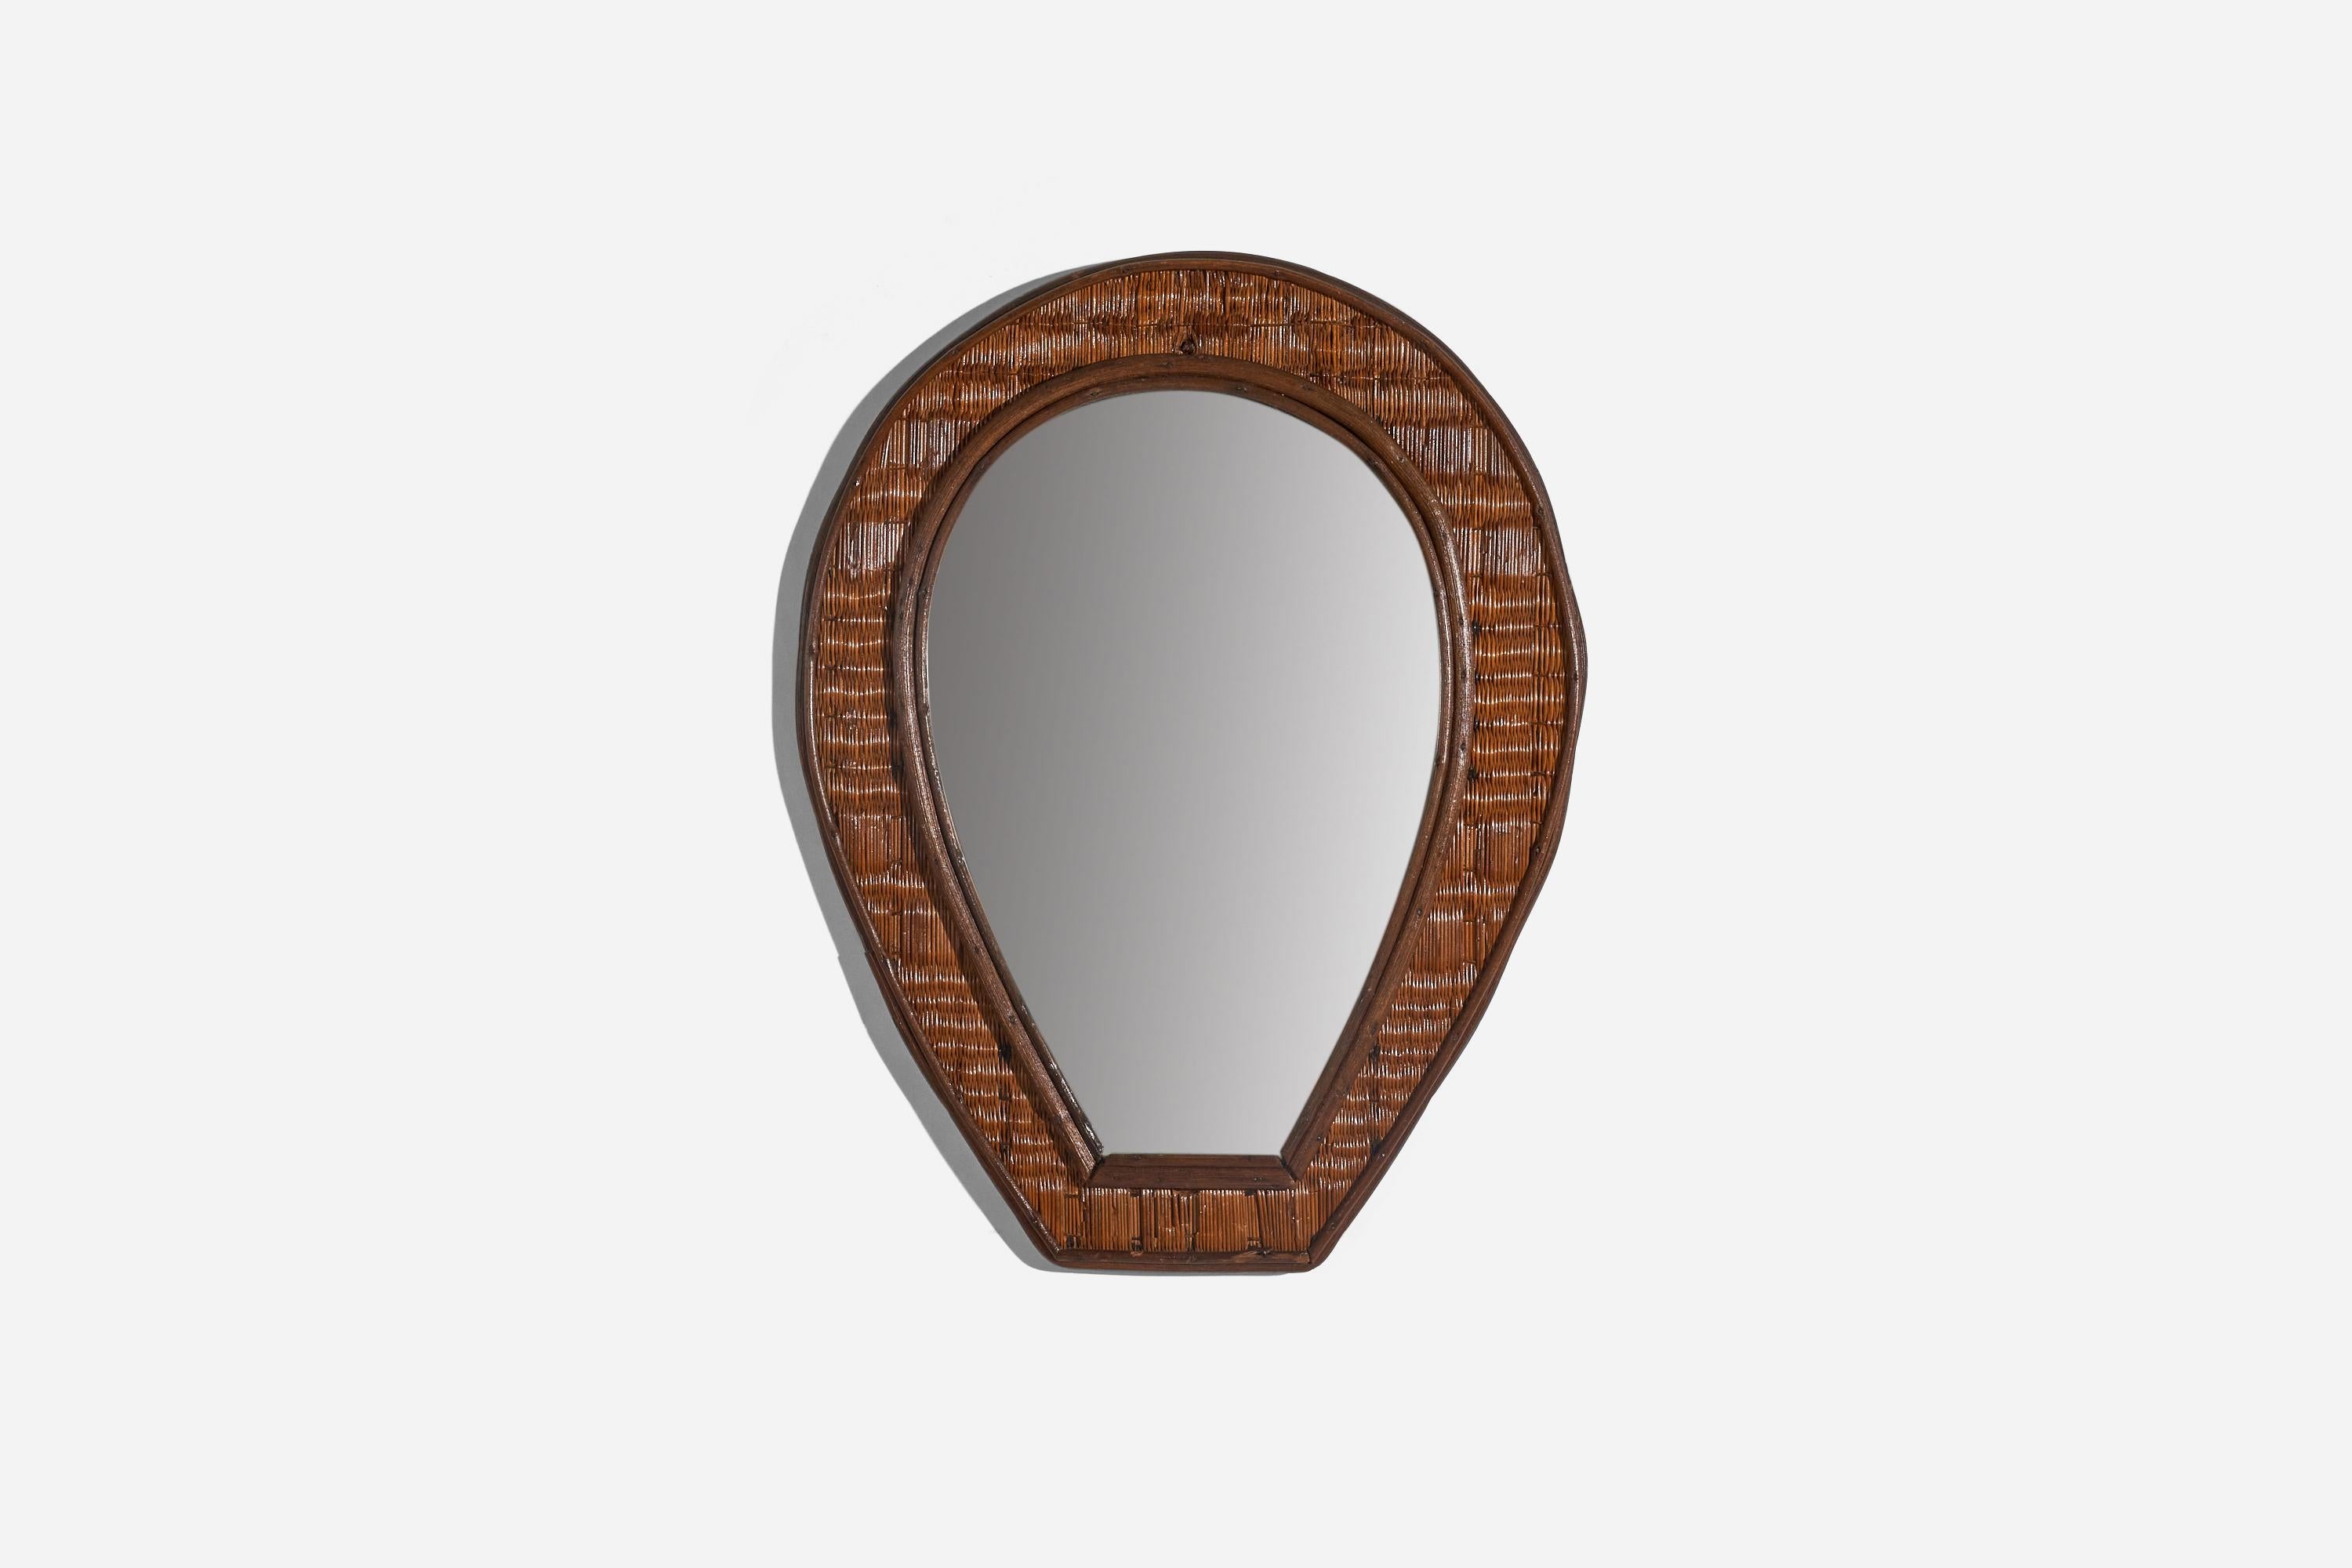 A rattan wall mirror designed and produced by an Italian designer, Italy, c. 1940s.
  